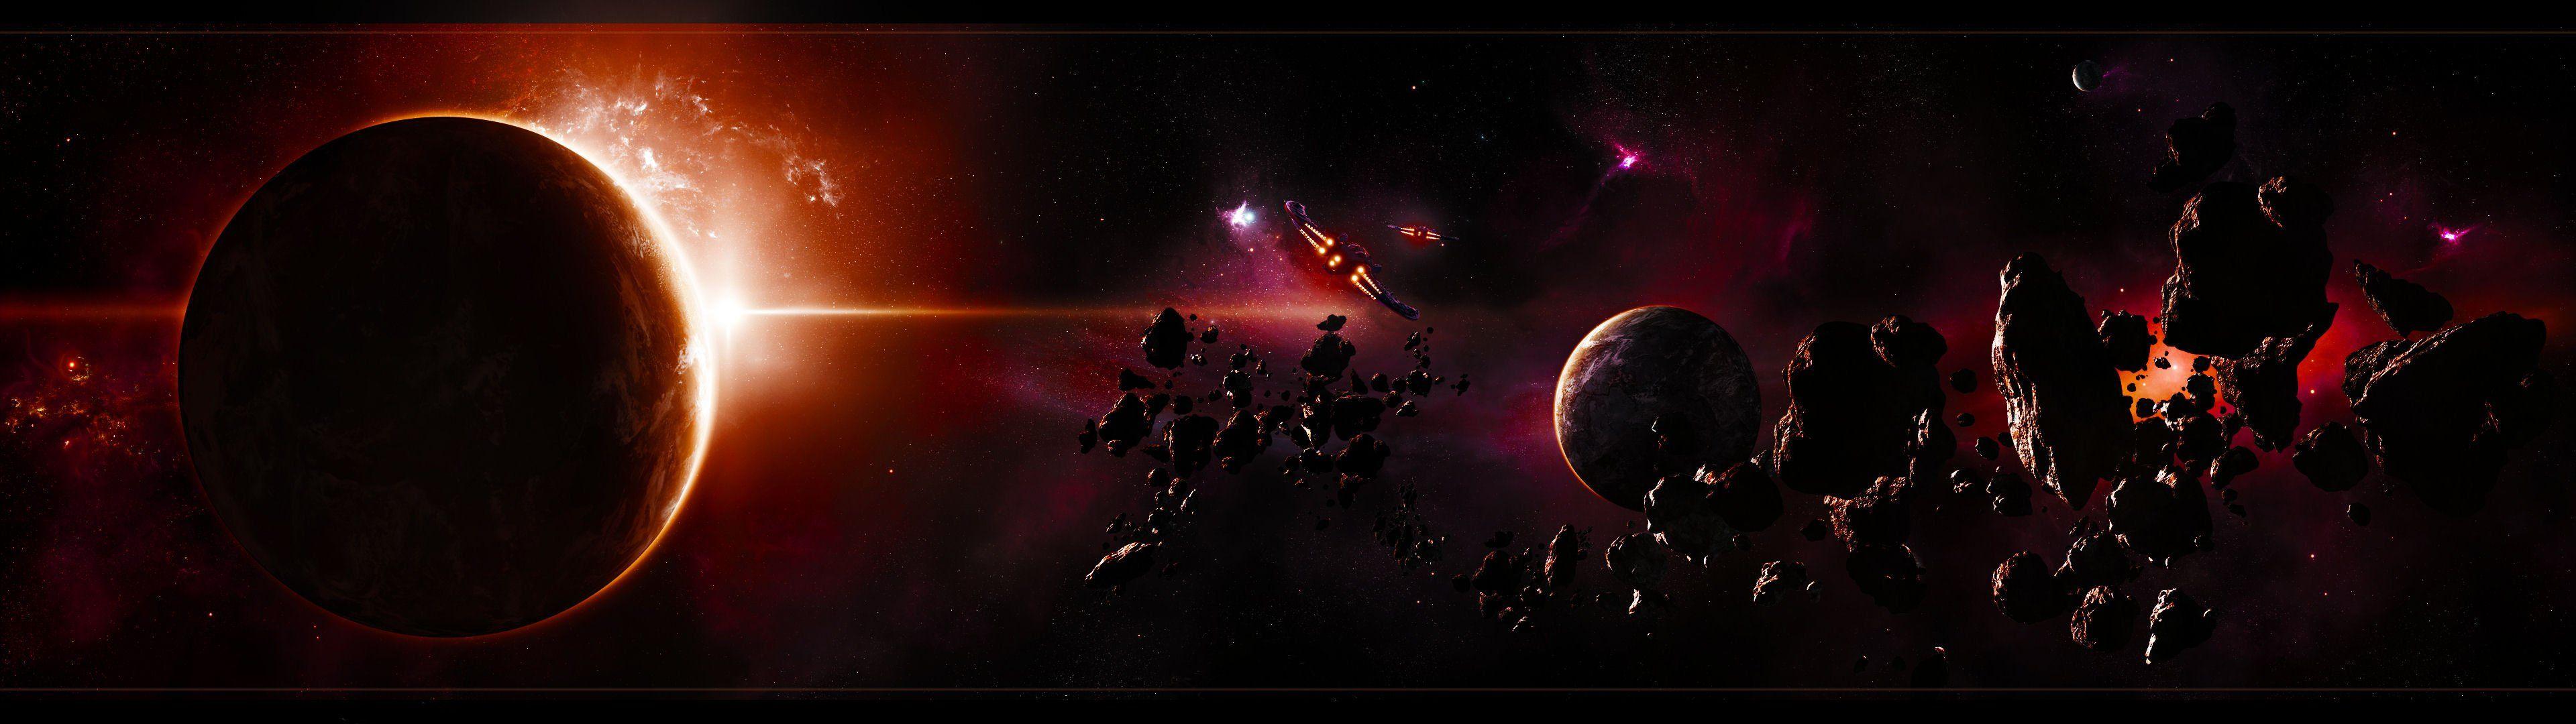 3840x1080 Wallpapers Space